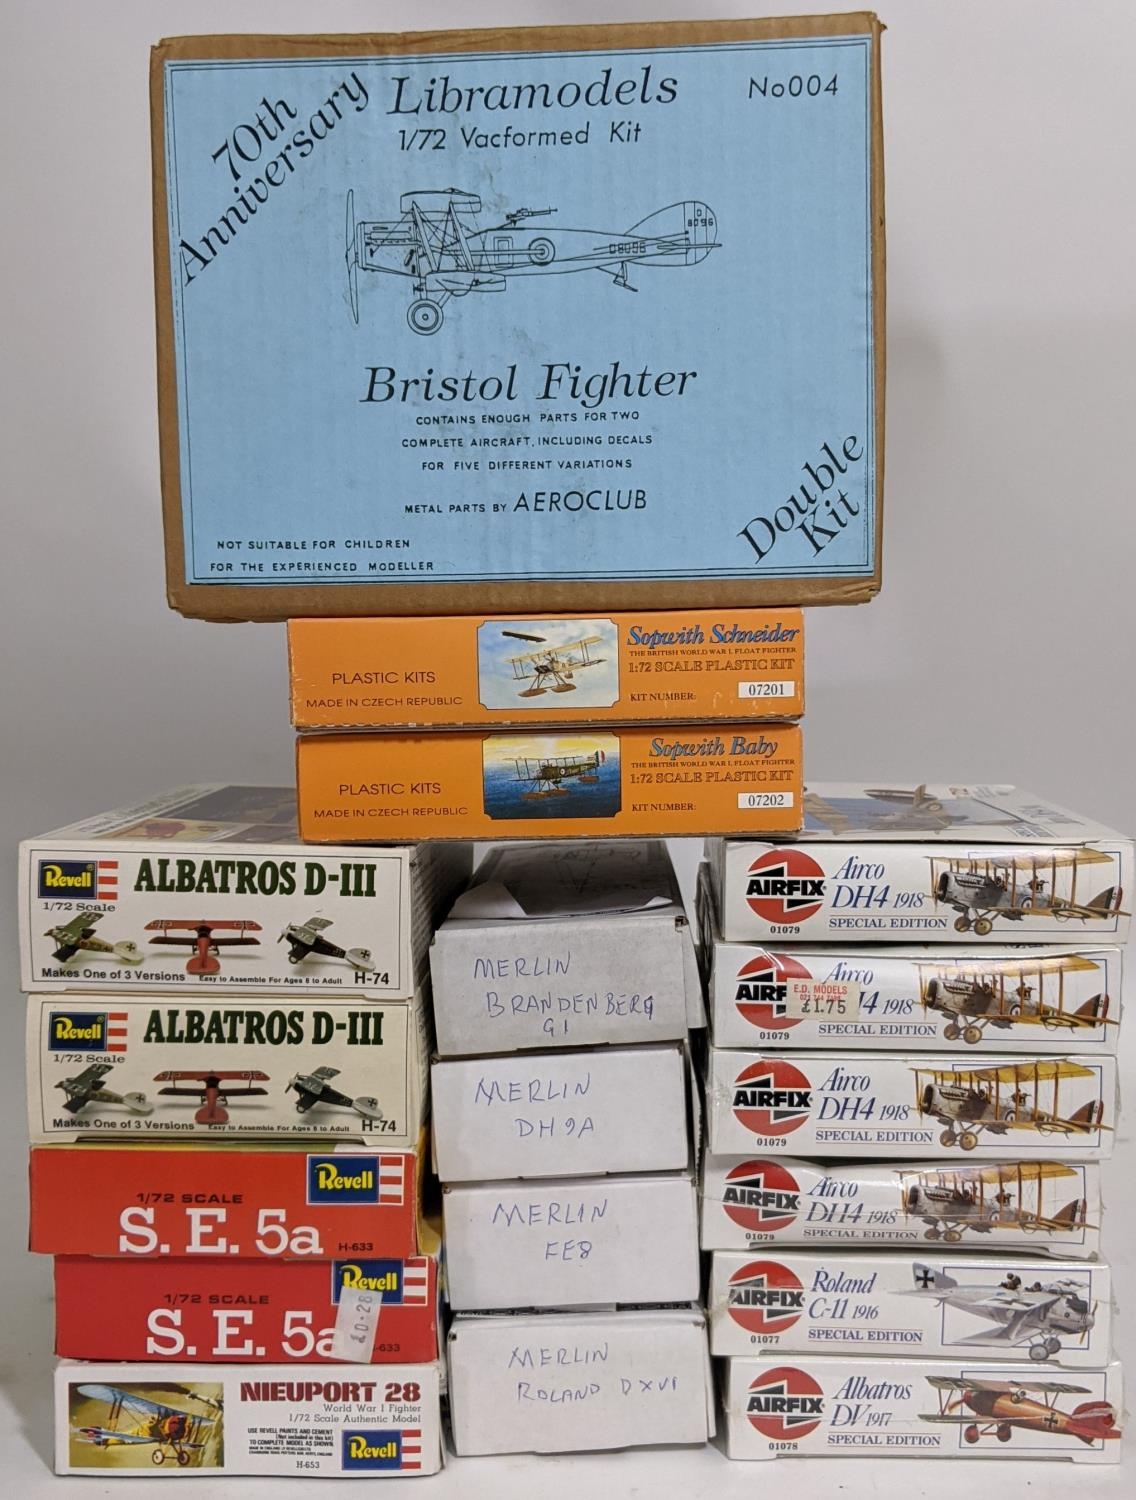 Collection of 24 model aircraft kits od WW1 planes, all believed to be complete and most sealed in